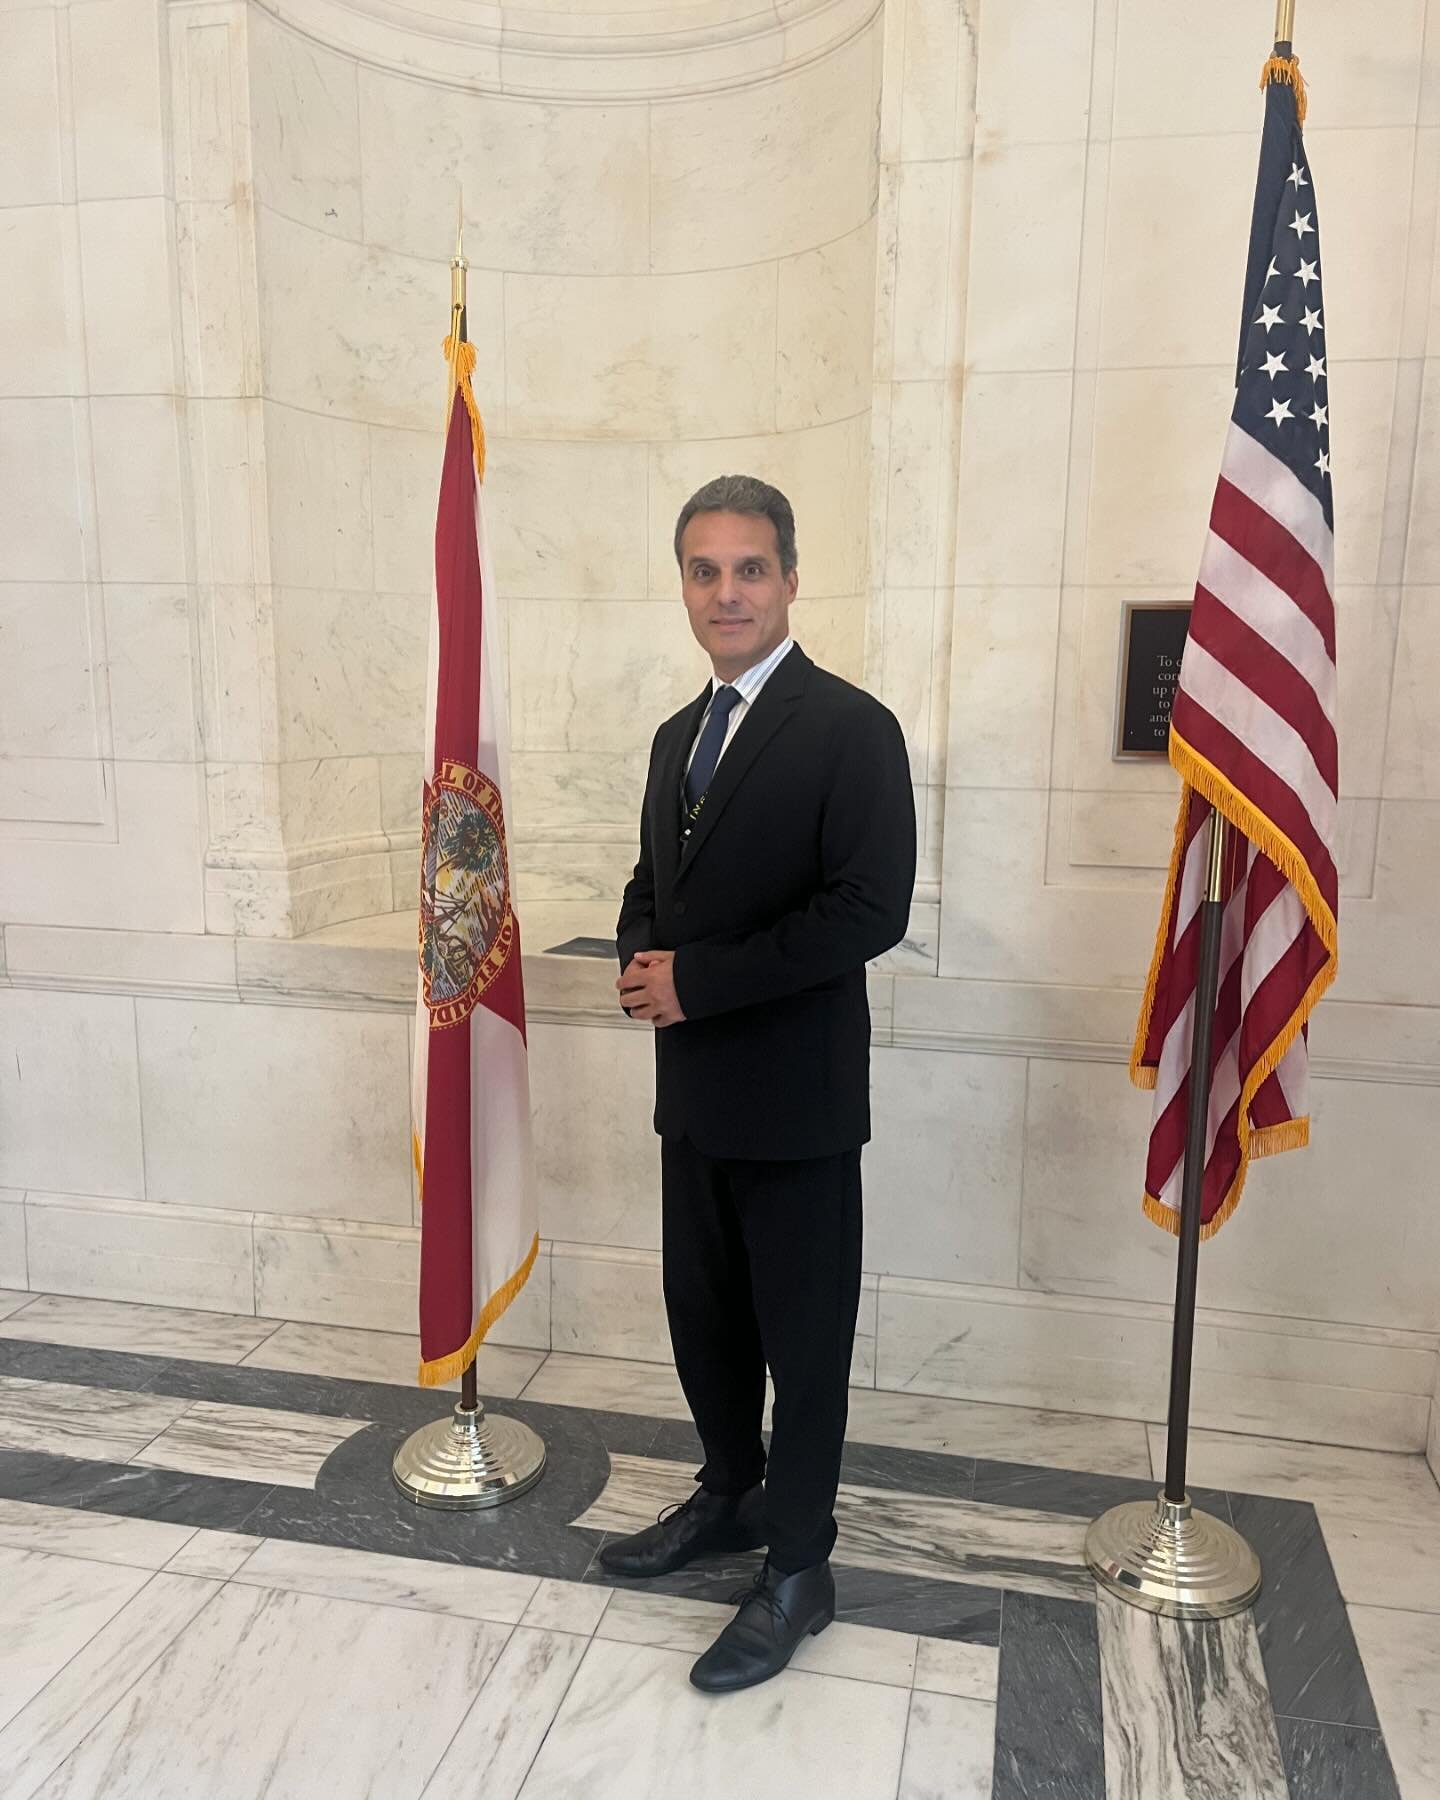 Our CEO &amp; Founder, DiegoGuimaraes, was invited to attend the Health &amp; Fitness Association Advocacy Fly-In in DC this week. He visited Capitol Hill to speak with House Representatives and Senators about three critical matters to the industry. 